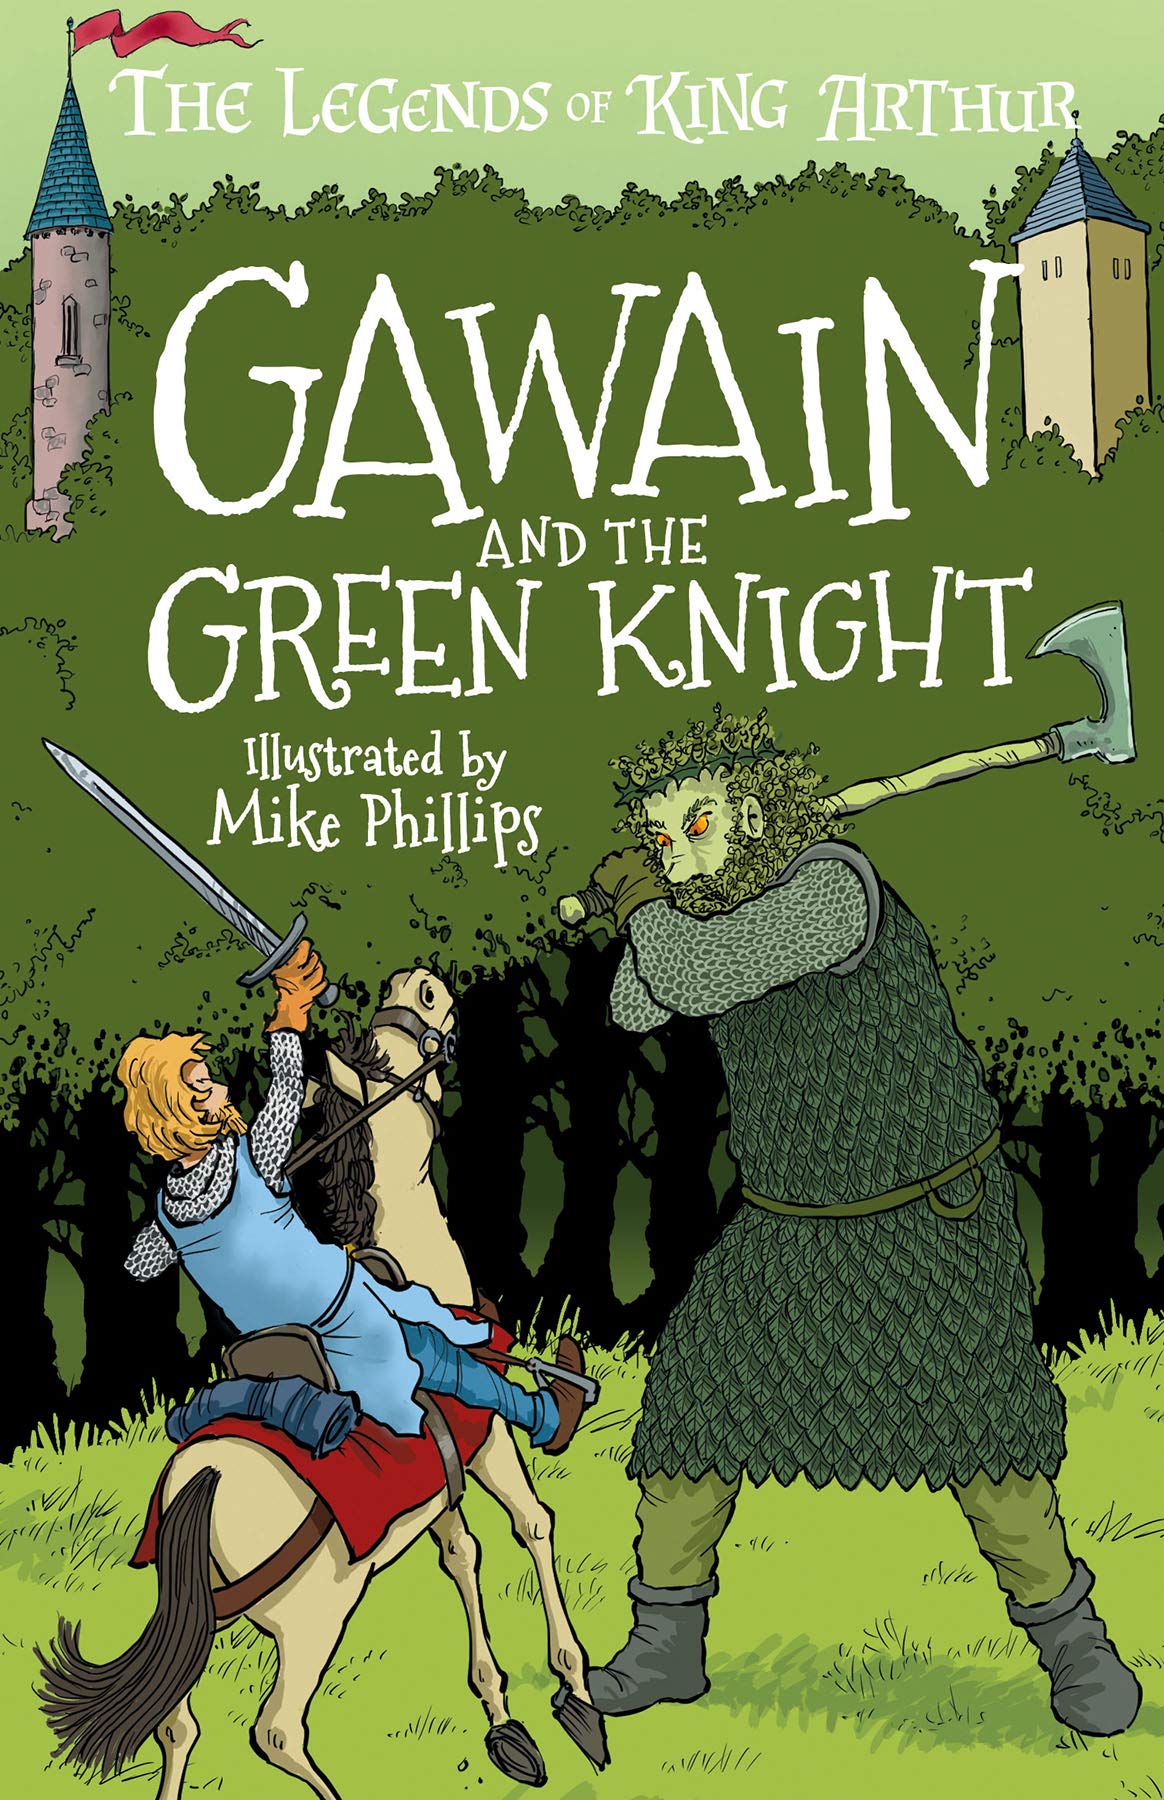 The Legends of King Arthur: Gawain and the Green Knight by Tracey Mayhew